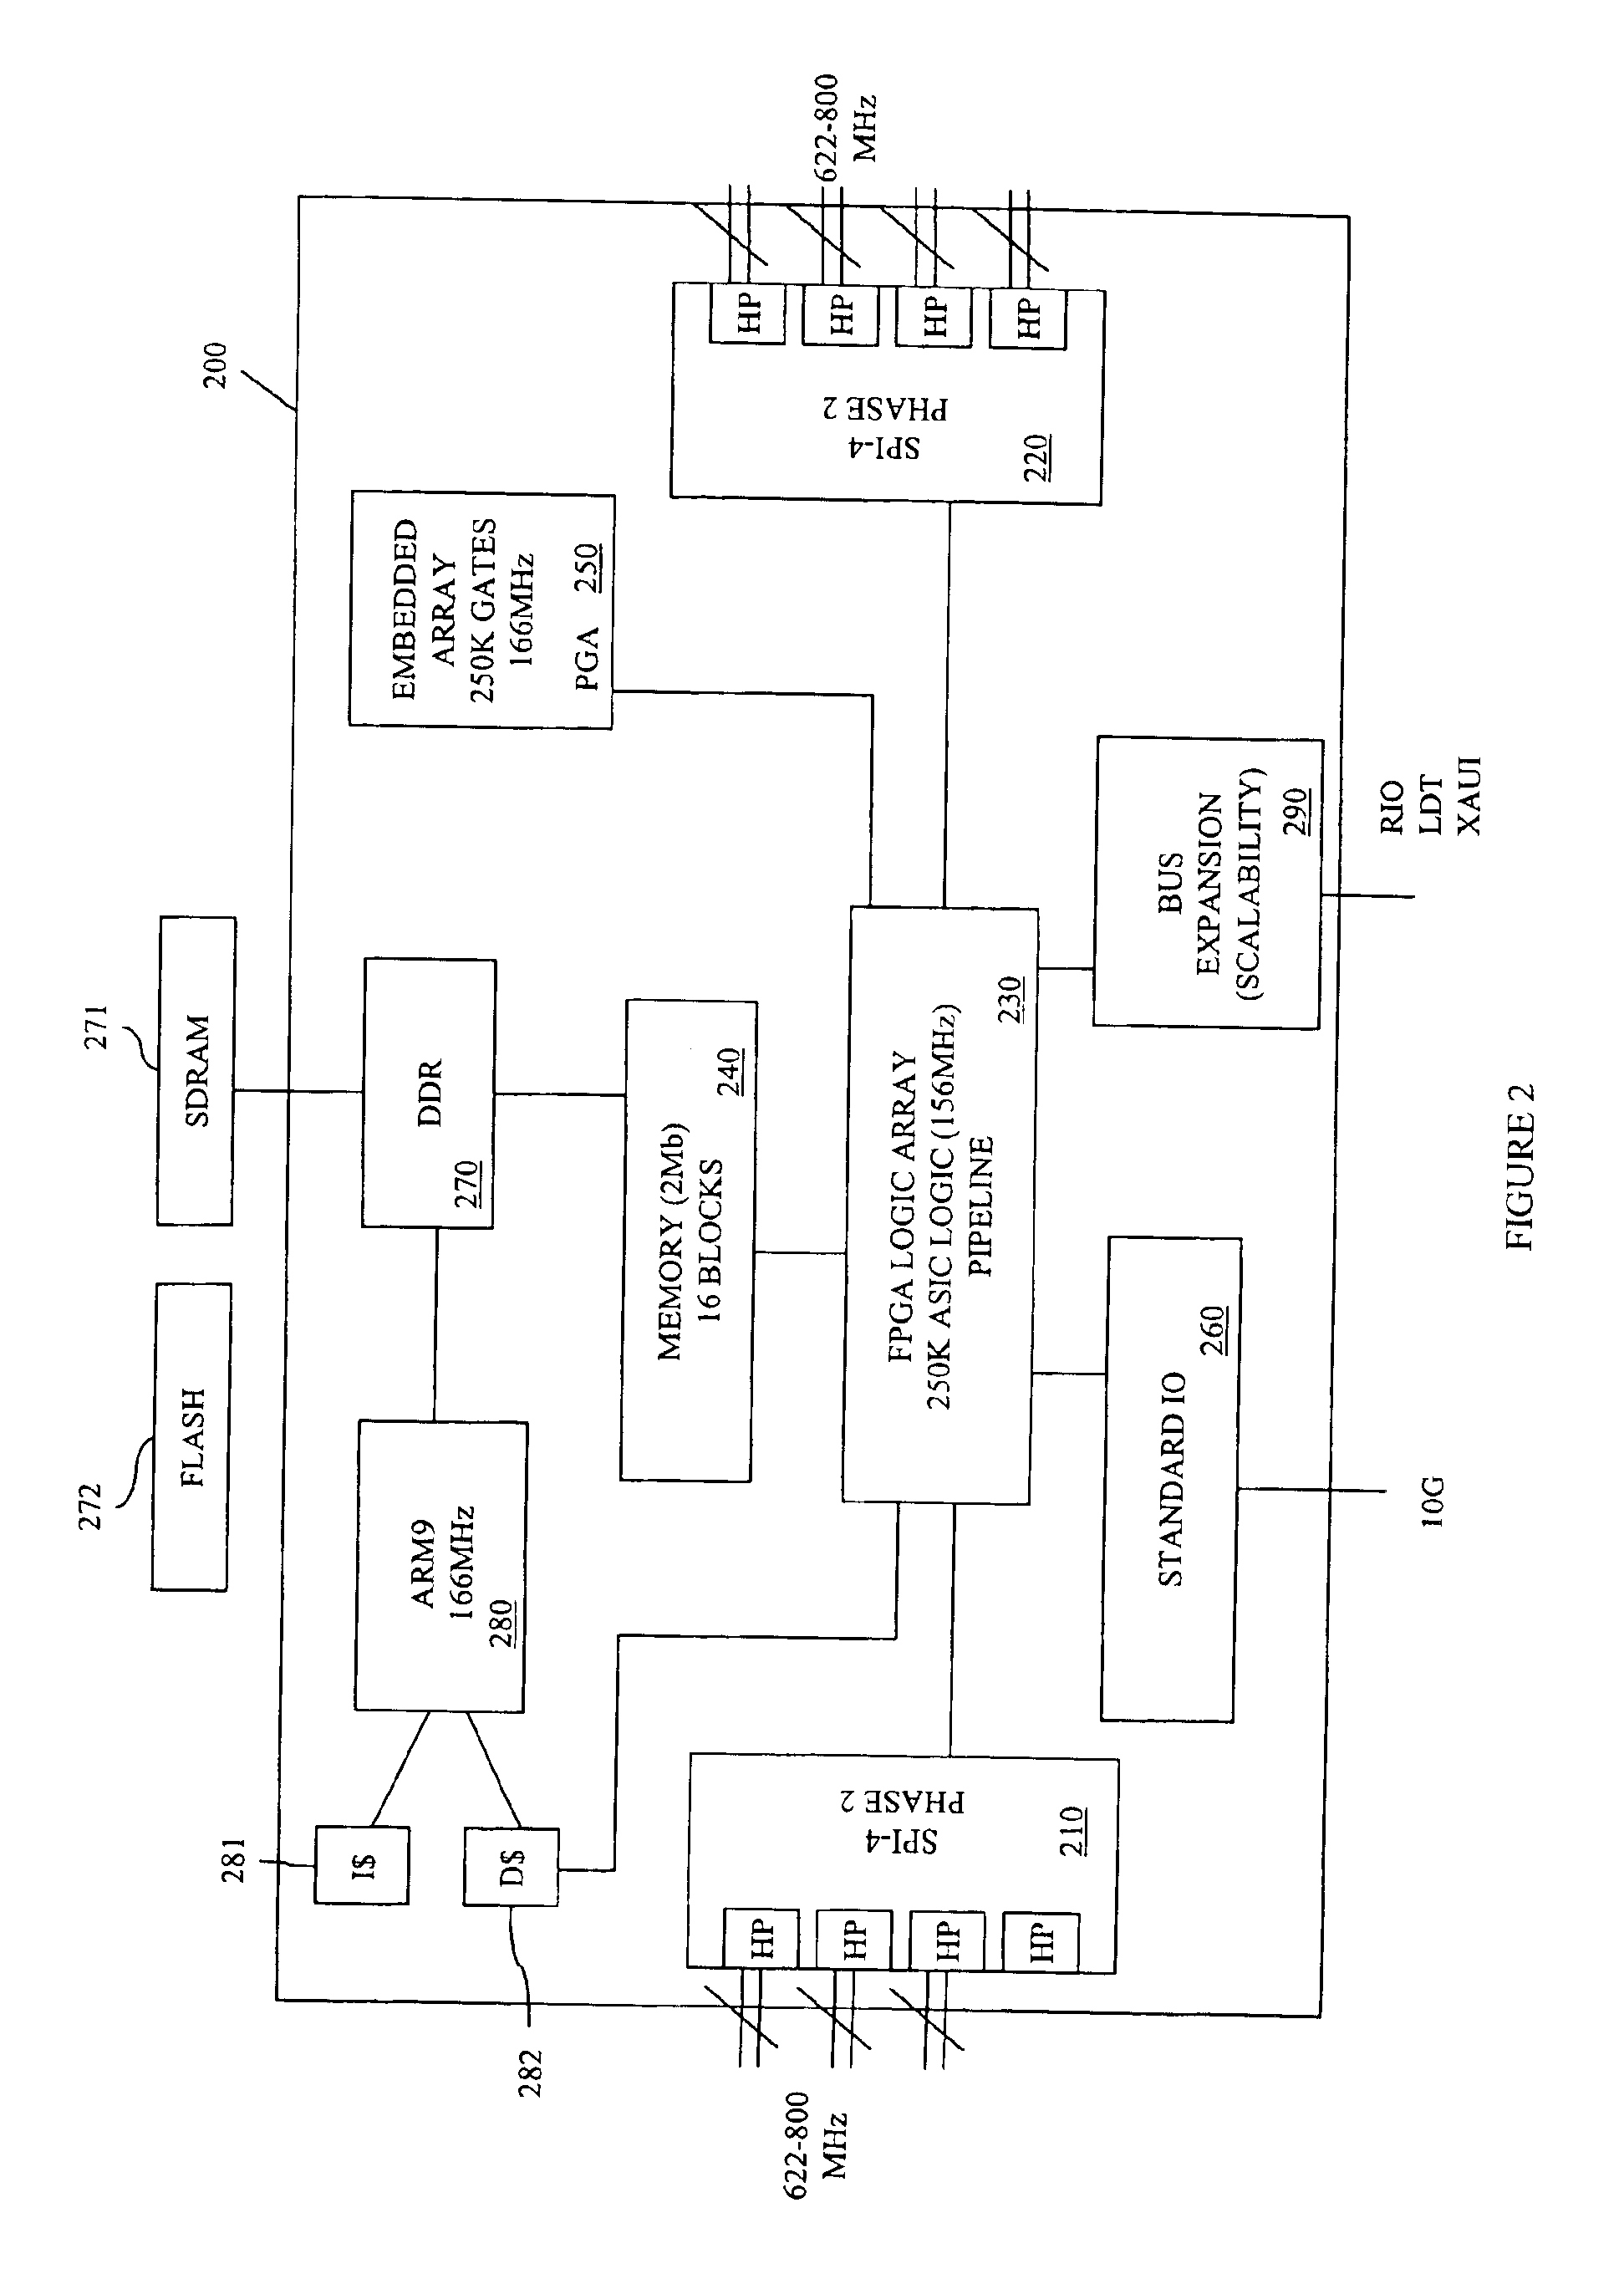 Integrated circuit having integrated programmable gate array and field programmable gate array, and method of operating the same